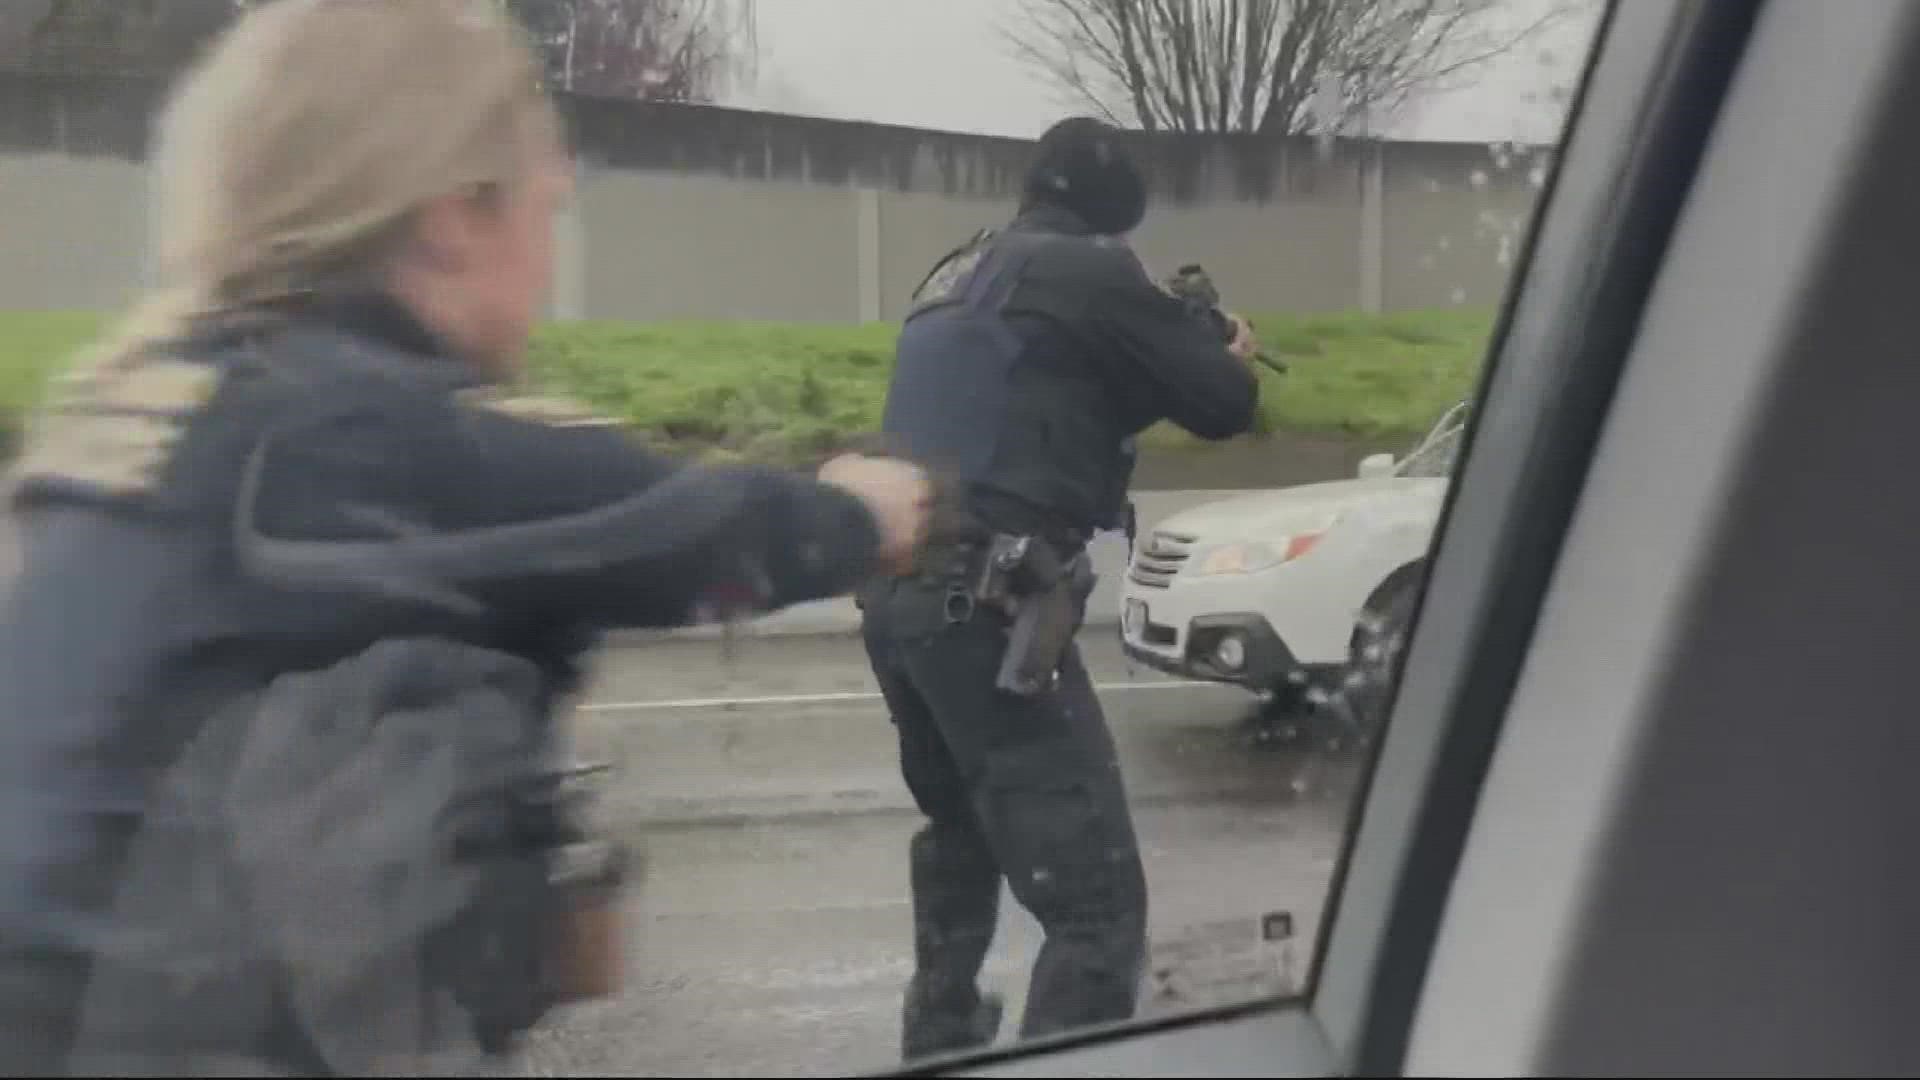 Police shot and killed an armed carjacking suspect who allegedly shot another person on I-5 Monday morning. KGW's Alma McCarty spoke to a witness of the incident.